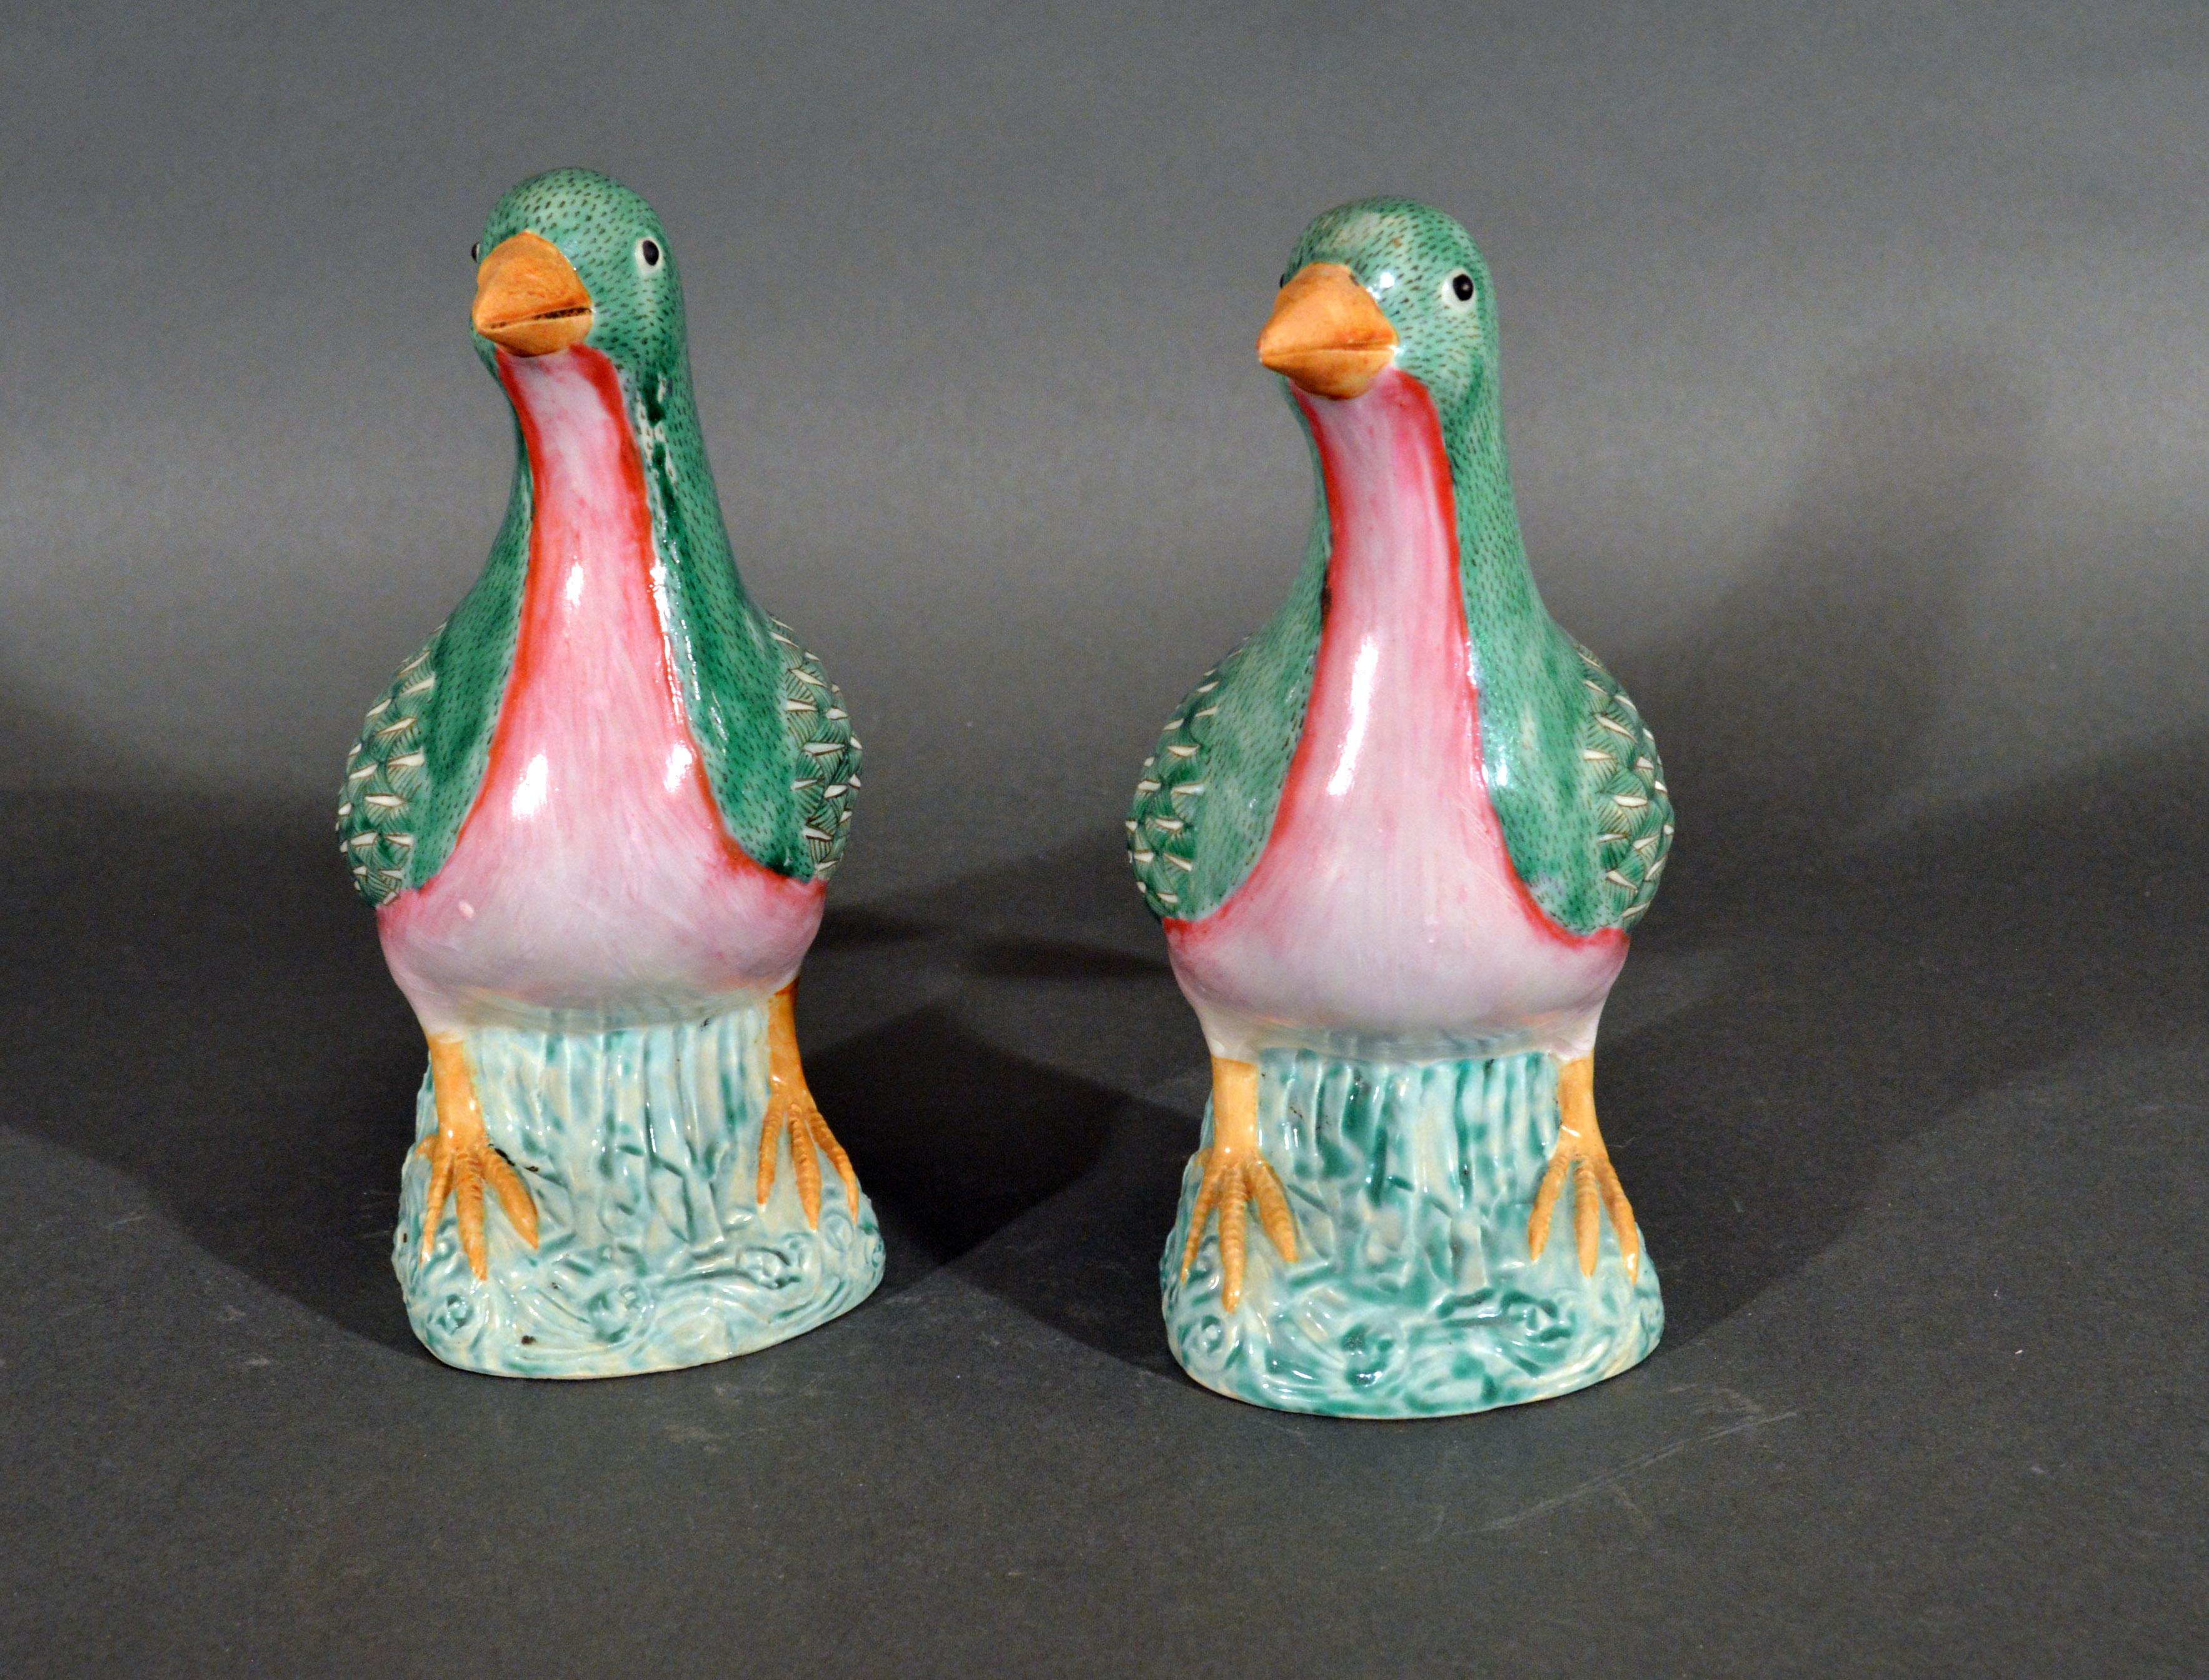 19th Century Chinese Export Porcelain Figures of Doves